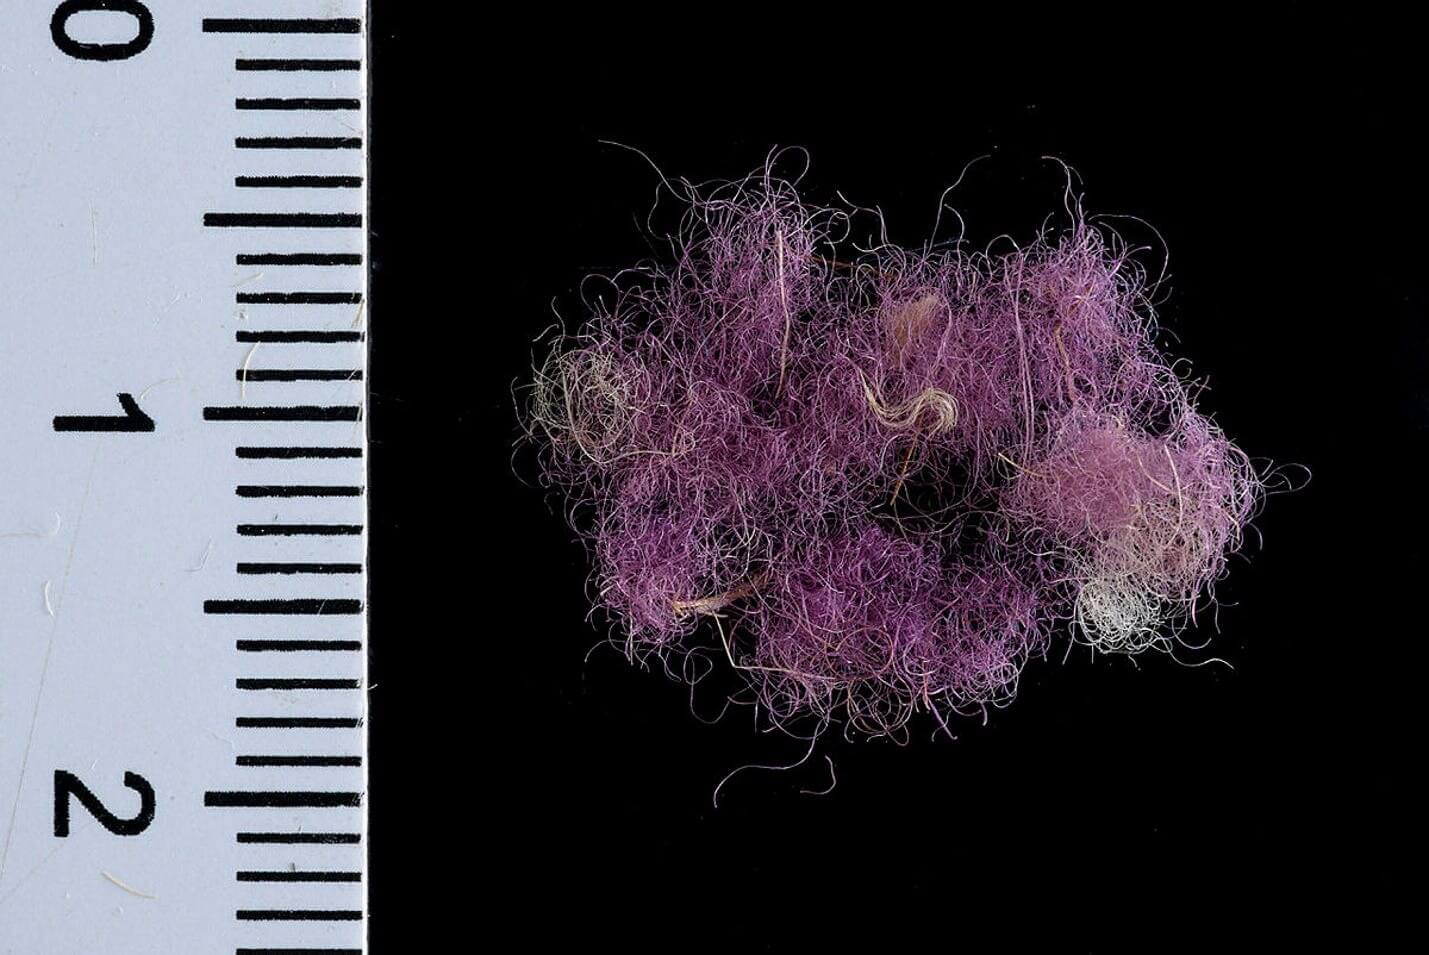 Wool fibers dued with purple about 3,000 years ago found at Timna in southern Israel.